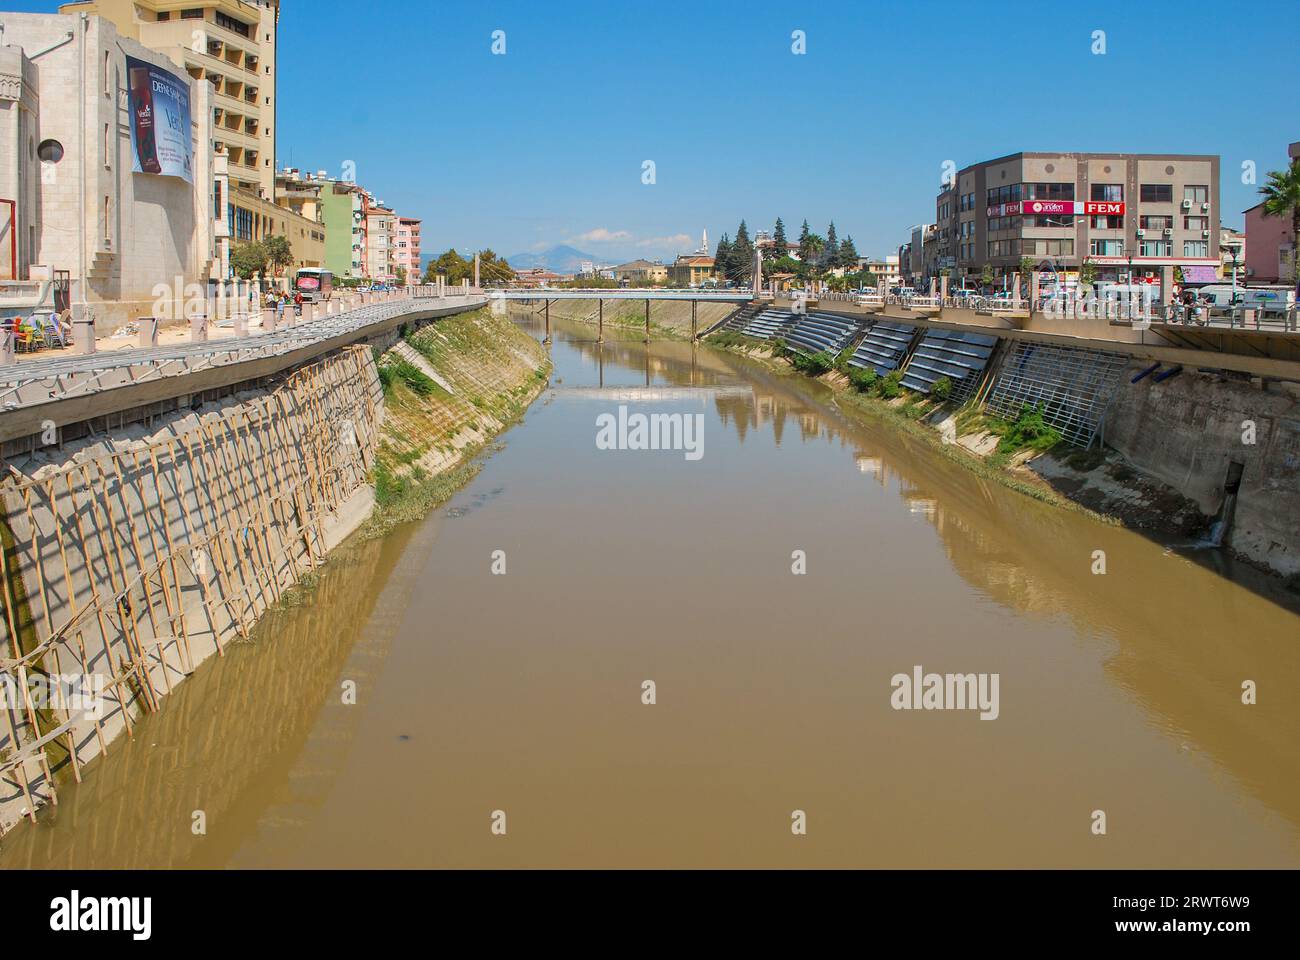 Asi River, Antakya, Hatay, Turkey - September 23rd 2009: dividing the city into two, known as 'Asi Nehri' in Turkish Stock Photo